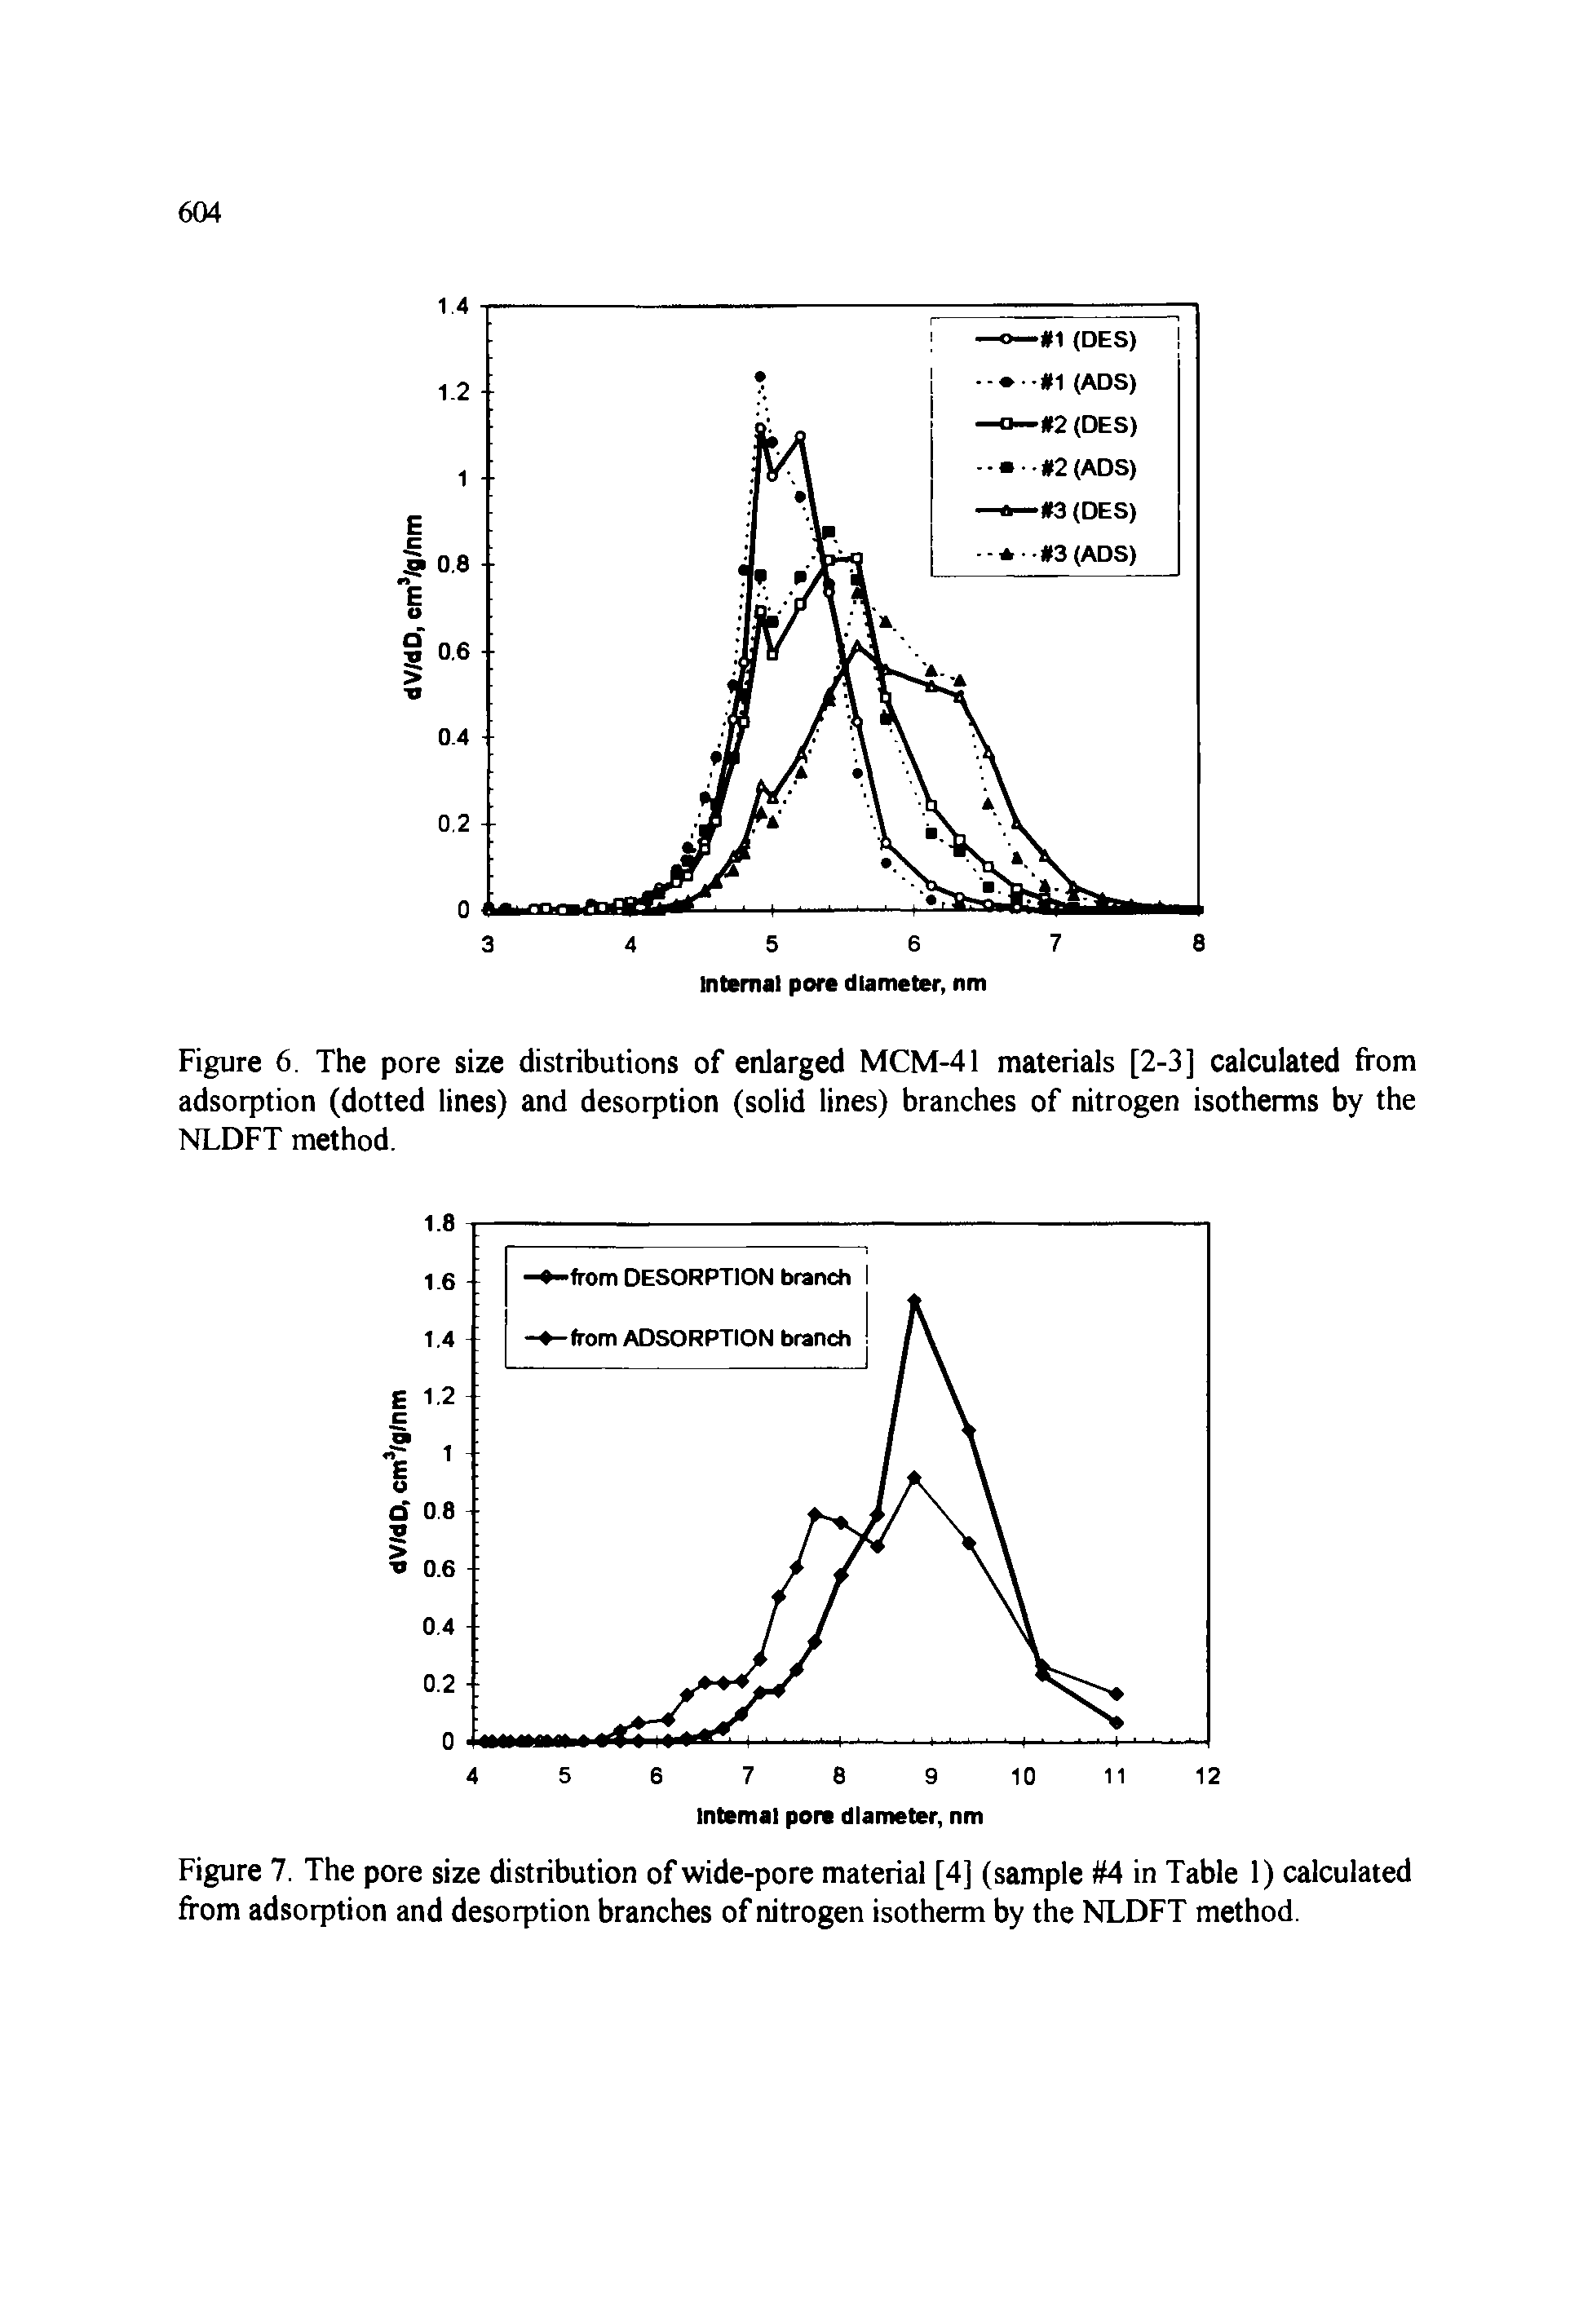 Figure 7. The pore size distribution of wide-pore material [4] (sample 4 in Table 1) calculated from adsorption and desorption branches of nitrogen isotherm by the NLDFT method.